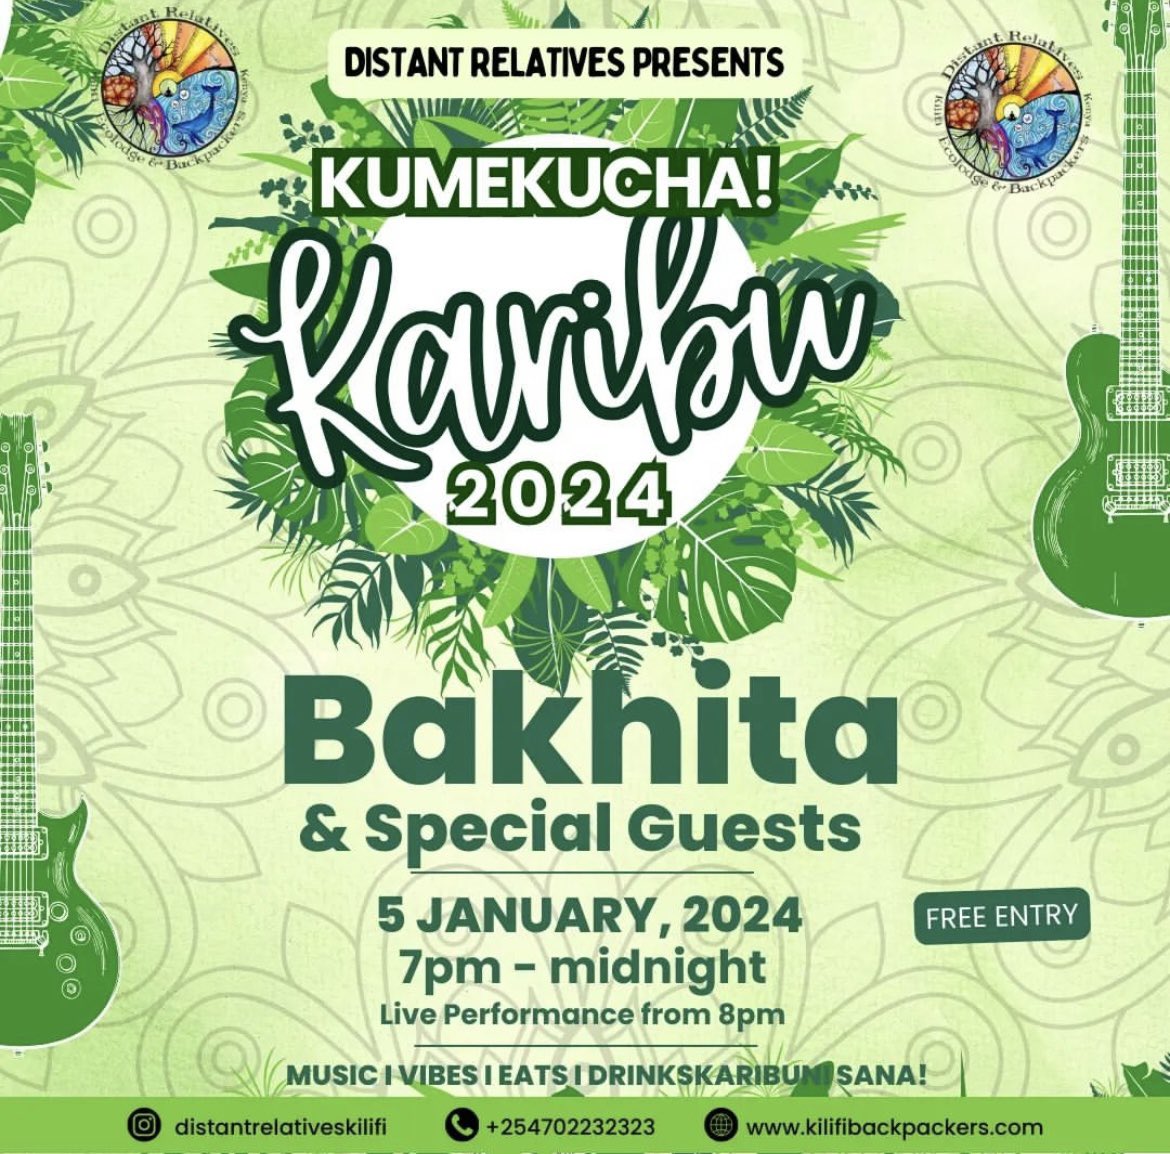 All good vibes in 2024 🍀🍀🍀 we’re continuing to usher in the new years blessings in the coast 🌴 see y’all this Friday for equal parts groovy and healing with @BAKHITA888 and friends at @KilifiEcoLodge ☯️🌀 free entry!